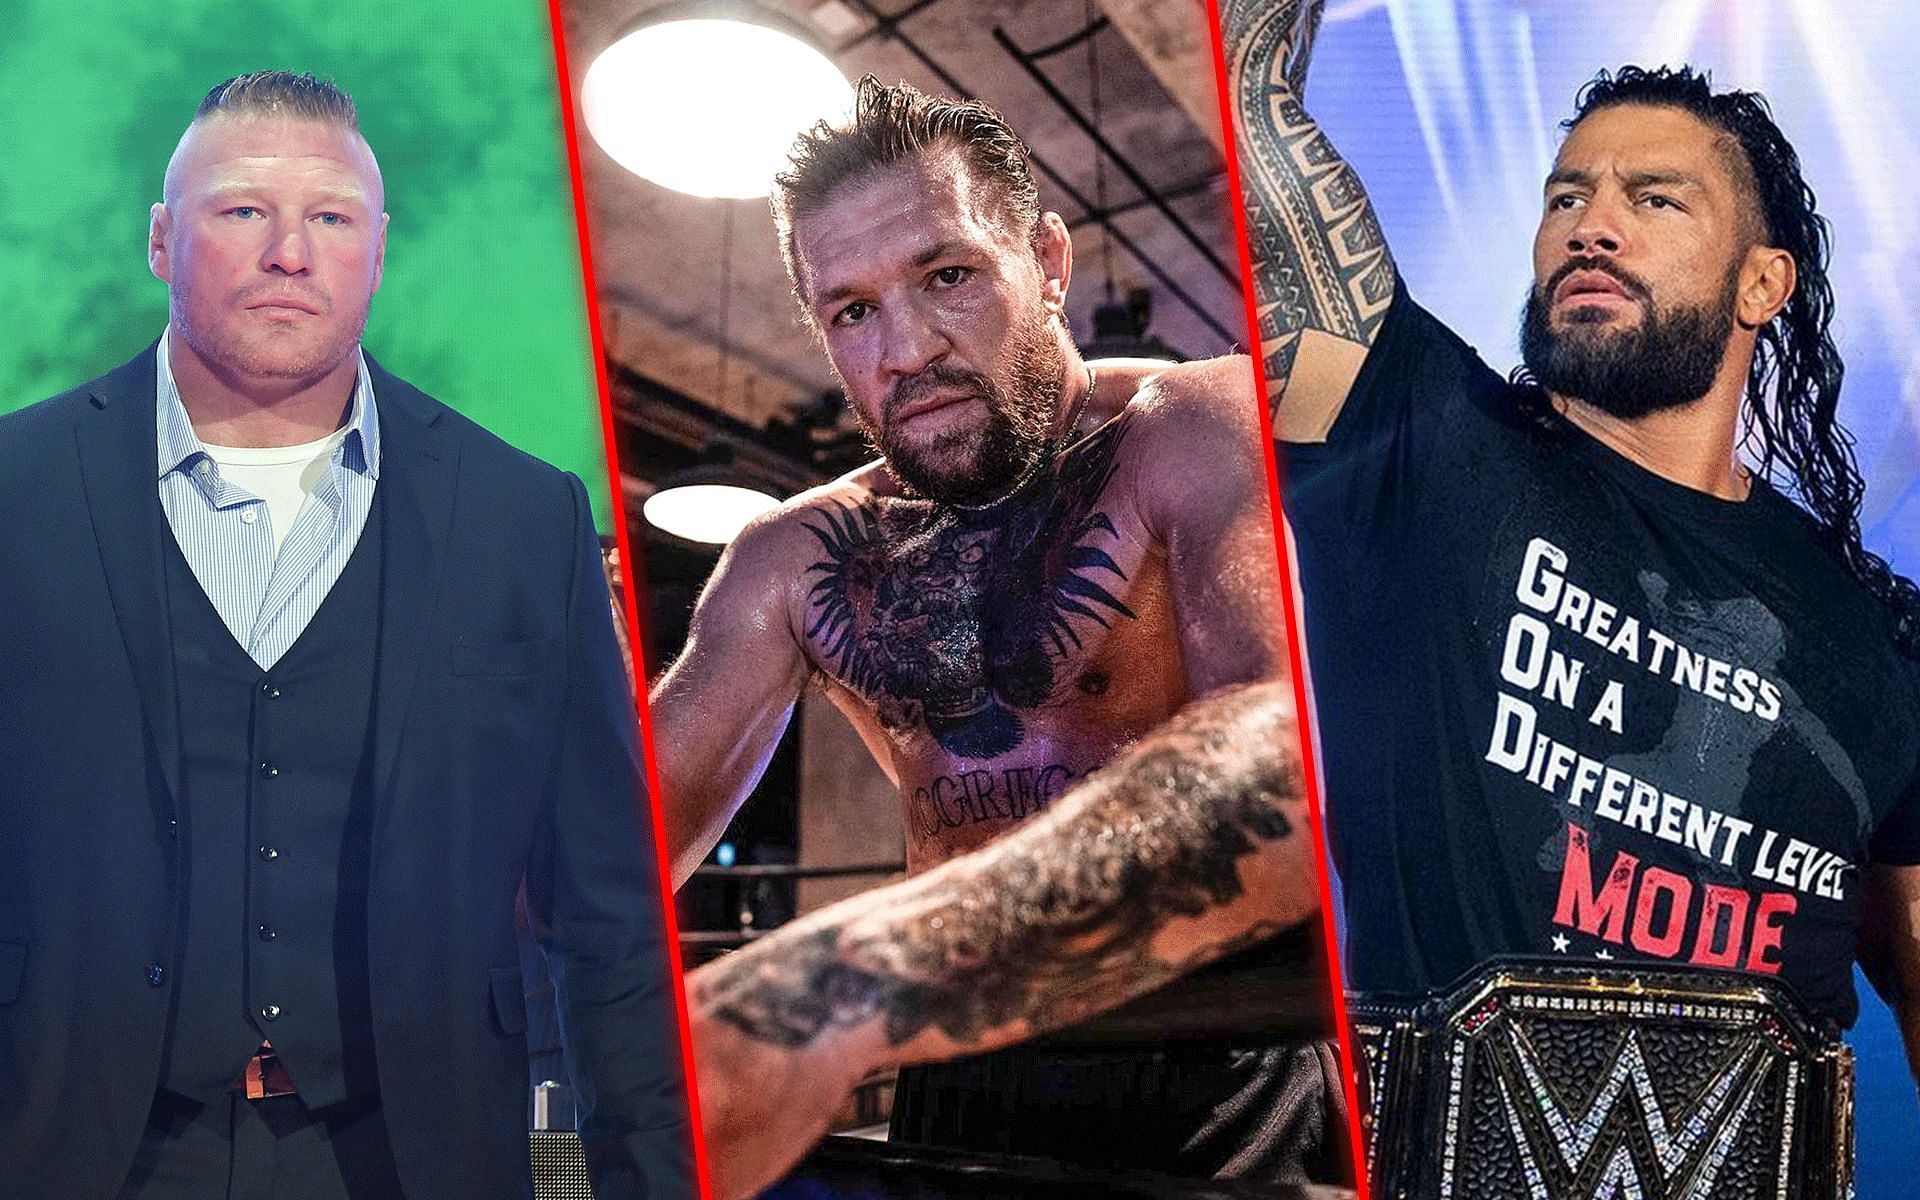 Conor McGregor once mocked by Brock Lesnar and Roman Reigns now gets mentioned on WWE RAW